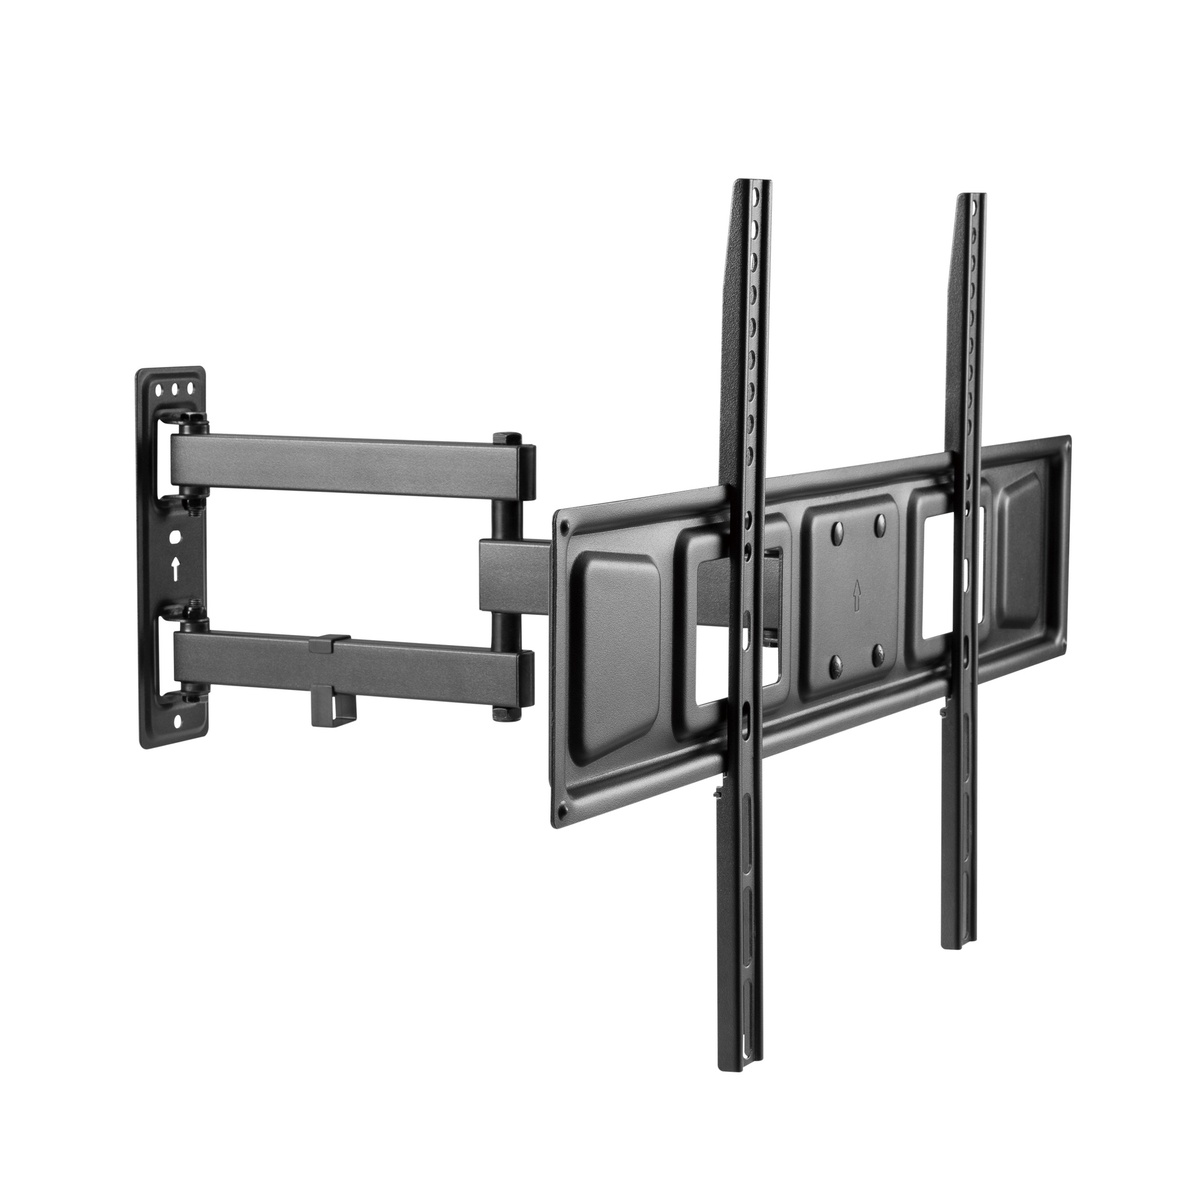 Full-motion TV wall mount 37&quot; - 70&quot;